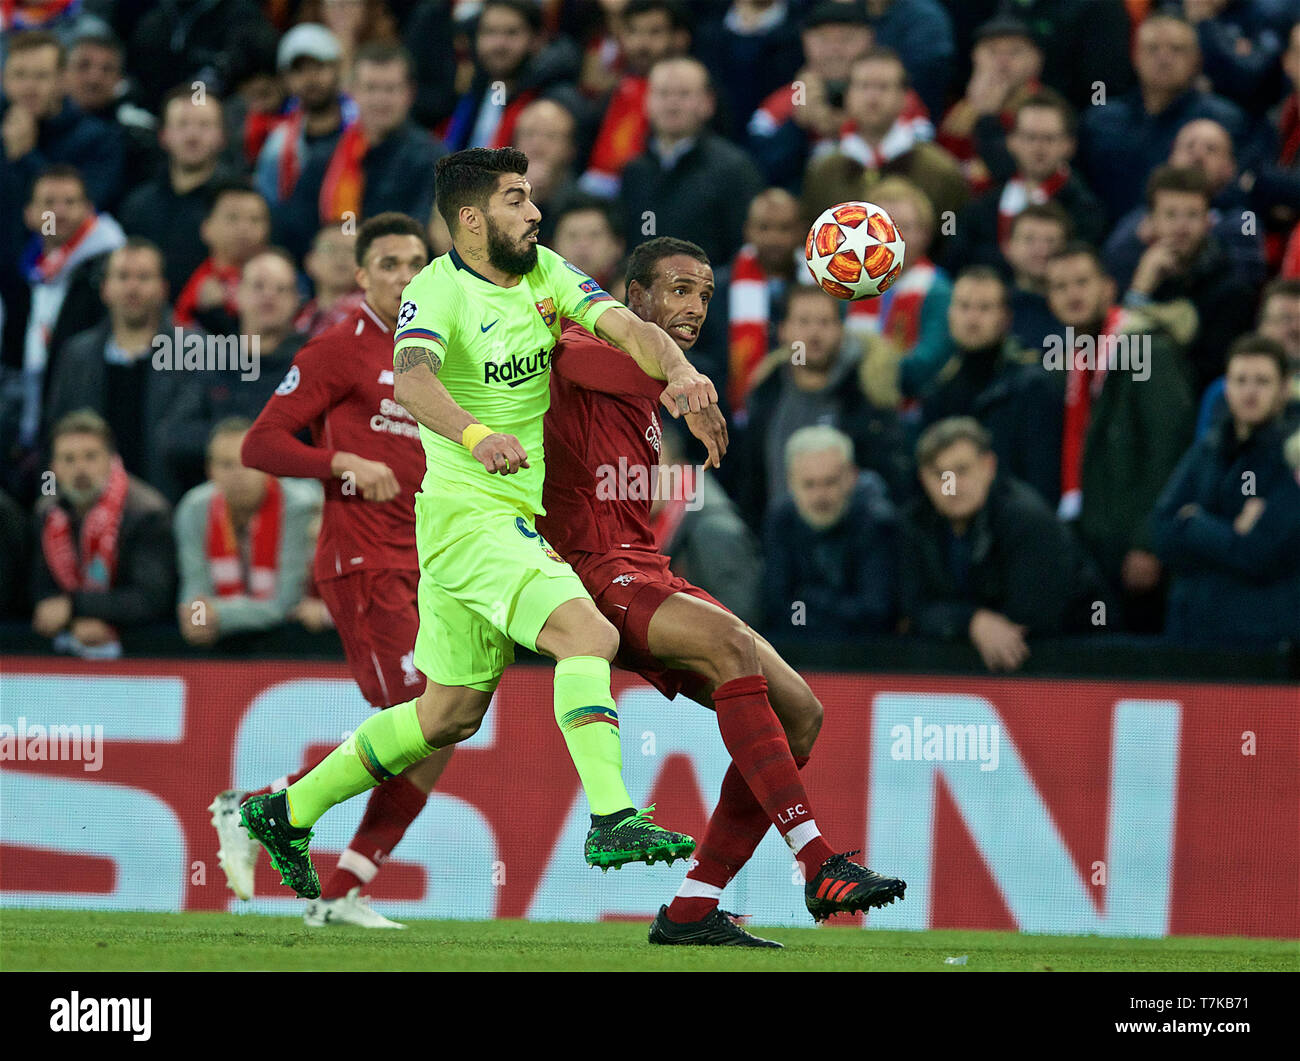 Liverpool. 8th May, 2019. Barcelona's Luis Suarez (L) challenges Liverpool's Joel Matip during the UEFA Champions League Semi-Final second Leg match between Liverpool FC and FC Barcelona at Anfield in Liverpool, Britain on May 7, 2019. Liverpool won 4-3 on aggregate and reached the final. Credit: Xinhua/Alamy Live News Stock Photo